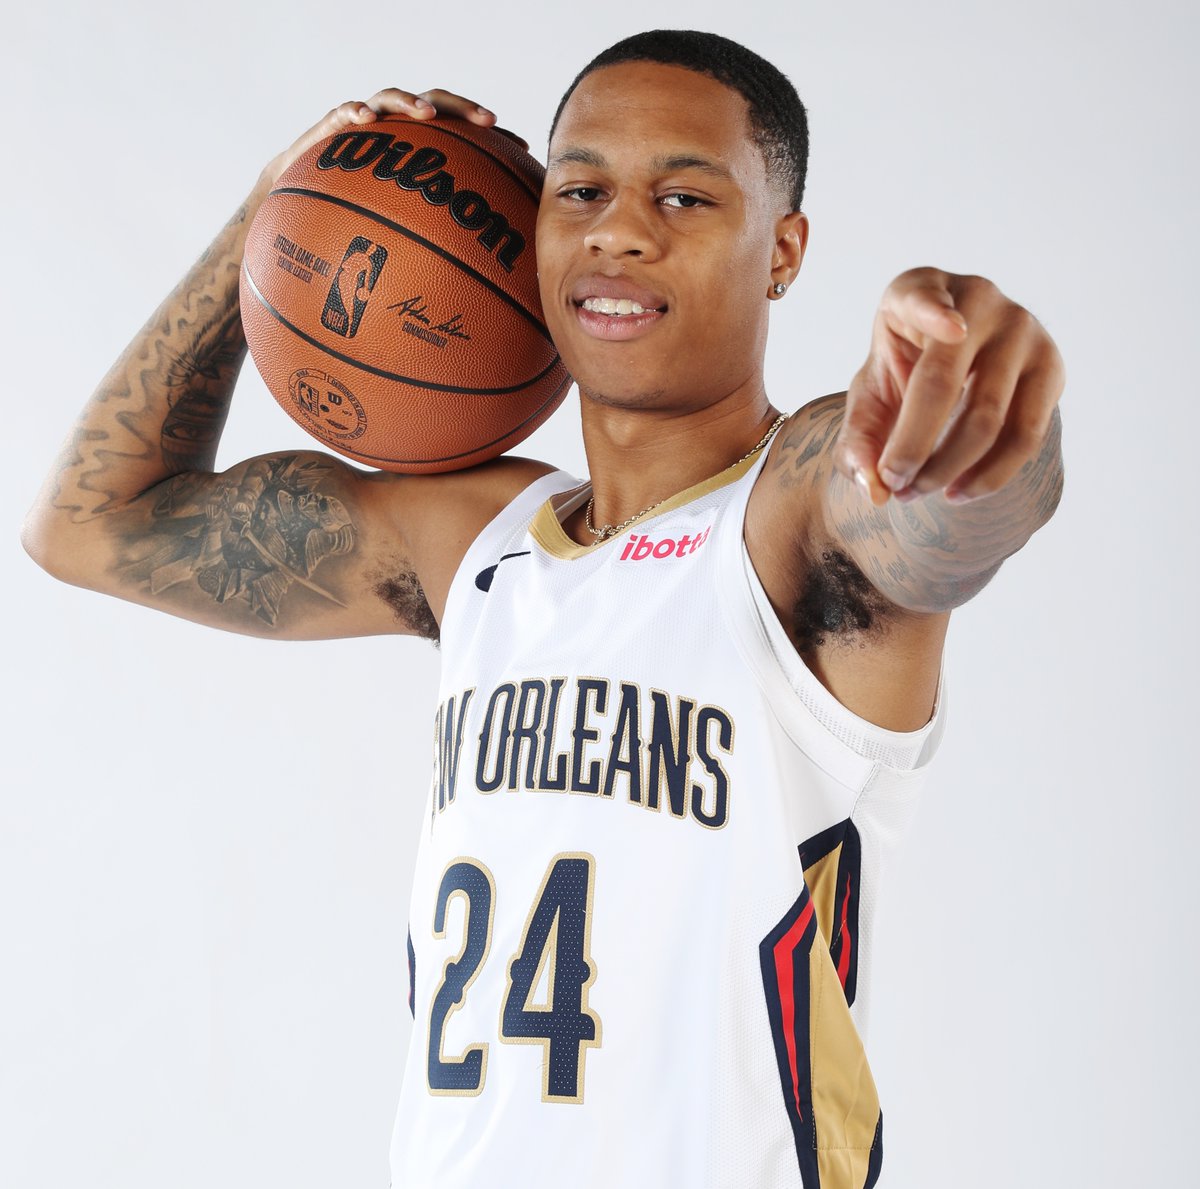 Join us in wishing @golive23 of the @PelicansNBA a HAPPY 22nd BIRTHDAY! #NBABDAY